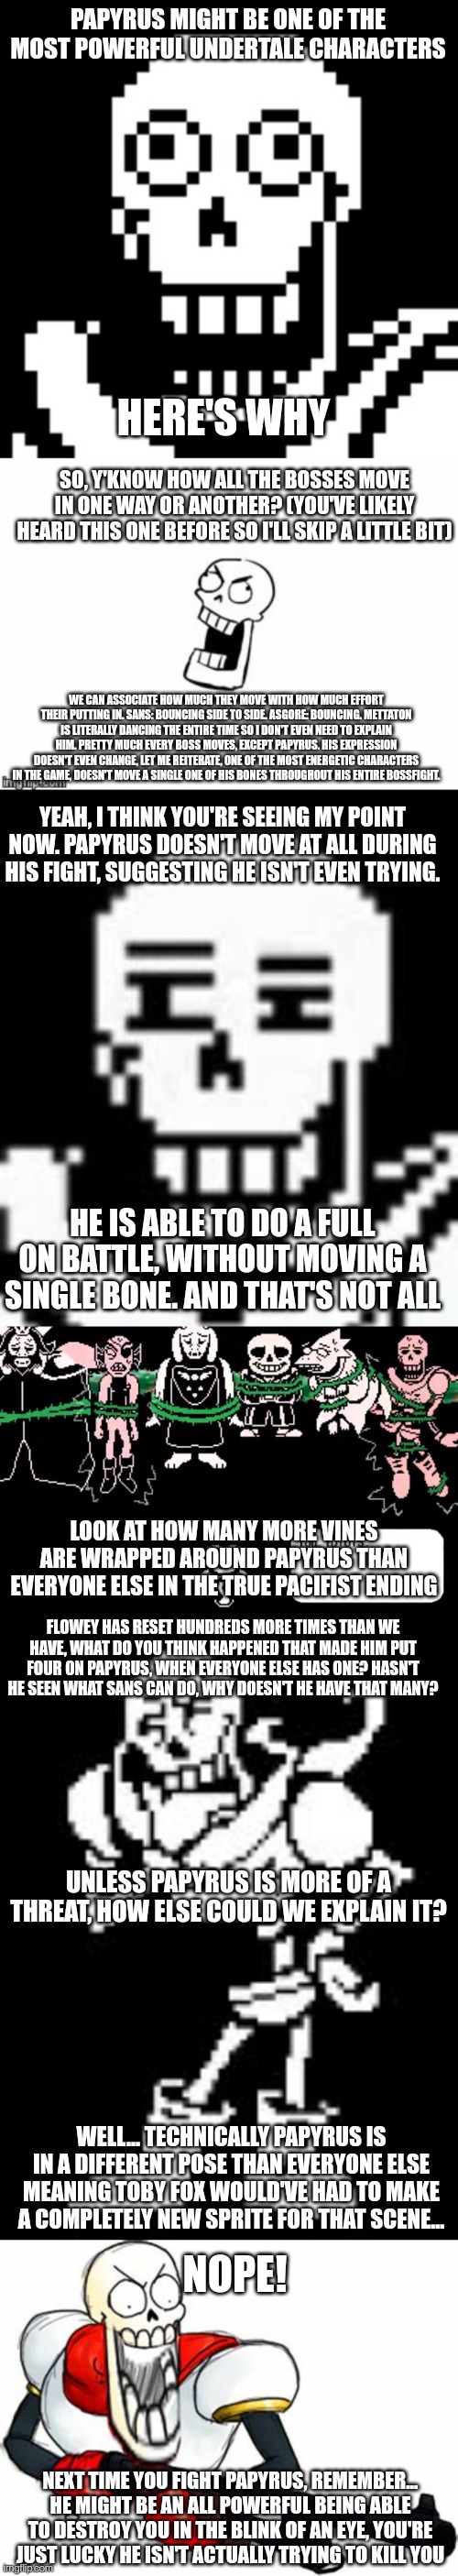 I saw this in a YouTube video, I don't have a link but I remembered it and thought it was a cool idea | PAPYRUS MIGHT BE ONE OF THE MOST POWERFUL UNDERTALE CHARACTERS; HERE'S WHY; SO, Y'KNOW HOW ALL THE BOSSES MOVE IN ONE WAY OR ANOTHER? (YOU'VE LIKELY HEARD THIS ONE BEFORE SO I'LL SKIP A LITTLE BIT); WE CAN ASSOCIATE HOW MUCH THEY MOVE WITH HOW MUCH EFFORT THEIR PUTTING IN. SANS: BOUNCING SIDE TO SIDE. ASGORE: BOUNCING. METTATON IS LITERALLY DANCING THE ENTIRE TIME SO I DON'T EVEN NEED TO EXPLAIN HIM. PRETTY MUCH EVERY BOSS MOVES, EXCEPT PAPYRUS. HIS EXPRESSION DOESN'T EVEN CHANGE, LET ME REITERATE, ONE OF THE MOST ENERGETIC CHARACTERS IN THE GAME, DOESN'T MOVE A SINGLE ONE OF HIS BONES THROUGHOUT HIS ENTIRE BOSSFIGHT. YEAH, I THINK YOU'RE SEEING MY POINT NOW. PAPYRUS DOESN'T MOVE AT ALL DURING HIS FIGHT, SUGGESTING HE ISN'T EVEN TRYING. HE IS ABLE TO DO A FULL ON BATTLE, WITHOUT MOVING A SINGLE BONE. AND THAT'S NOT ALL; LOOK AT HOW MANY MORE VINES ARE WRAPPED AROUND PAPYRUS THAN EVERYONE ELSE IN THE TRUE PACIFIST ENDING; FLOWEY HAS RESET HUNDREDS MORE TIMES THAN WE HAVE, WHAT DO YOU THINK HAPPENED THAT MADE HIM PUT FOUR ON PAPYRUS, WHEN EVERYONE ELSE HAS ONE? HASN'T HE SEEN WHAT SANS CAN DO, WHY DOESN'T HE HAVE THAT MANY? UNLESS PAPYRUS IS MORE OF A THREAT, HOW ELSE COULD WE EXPLAIN IT? WELL... TECHNICALLY PAPYRUS IS IN A DIFFERENT POSE THAN EVERYONE ELSE MEANING TOBY FOX WOULD'VE HAD TO MAKE A COMPLETELY NEW SPRITE FOR THAT SCENE... NOPE! NEXT TIME YOU FIGHT PAPYRUS, REMEMBER... HE MIGHT BE AN ALL POWERFUL BEING ABLE TO DESTROY YOU IN THE BLINK OF AN EYE, YOU'RE JUST LUCKY HE ISN'T ACTUALLY TRYING TO KILL YOU | image tagged in papyrus undertale,undertale papyrus,papyrus,gun pap | made w/ Imgflip meme maker